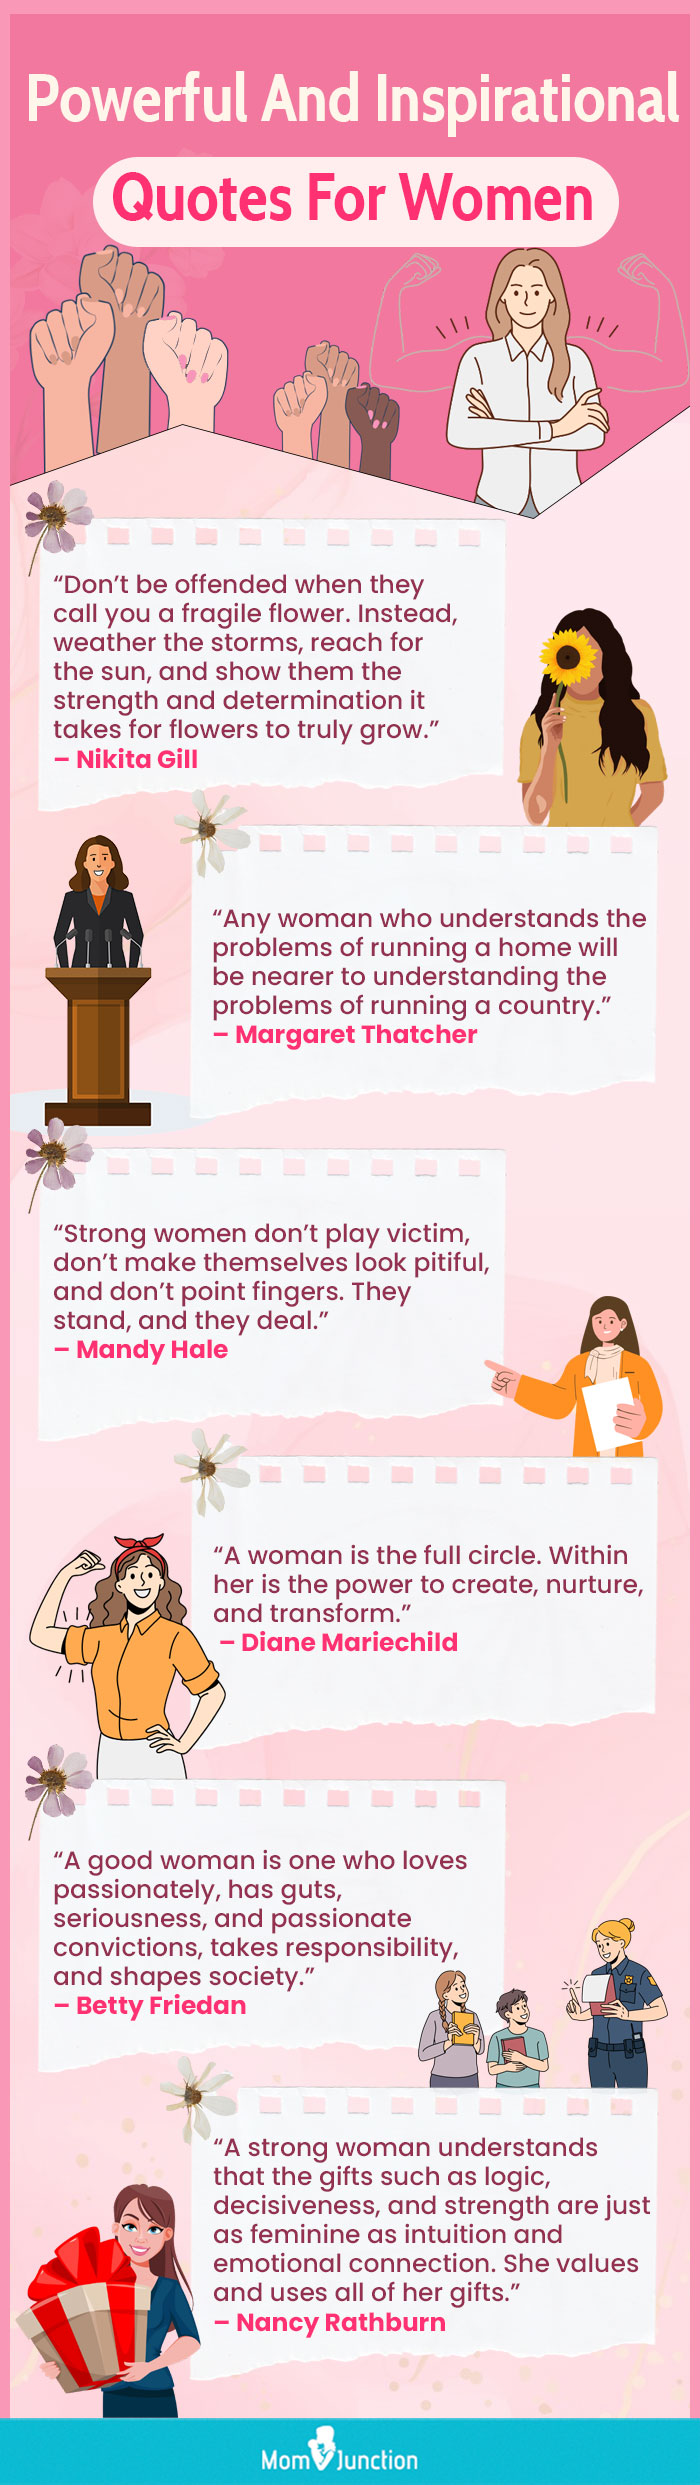 Powerful And Inspirational Quotes For Women